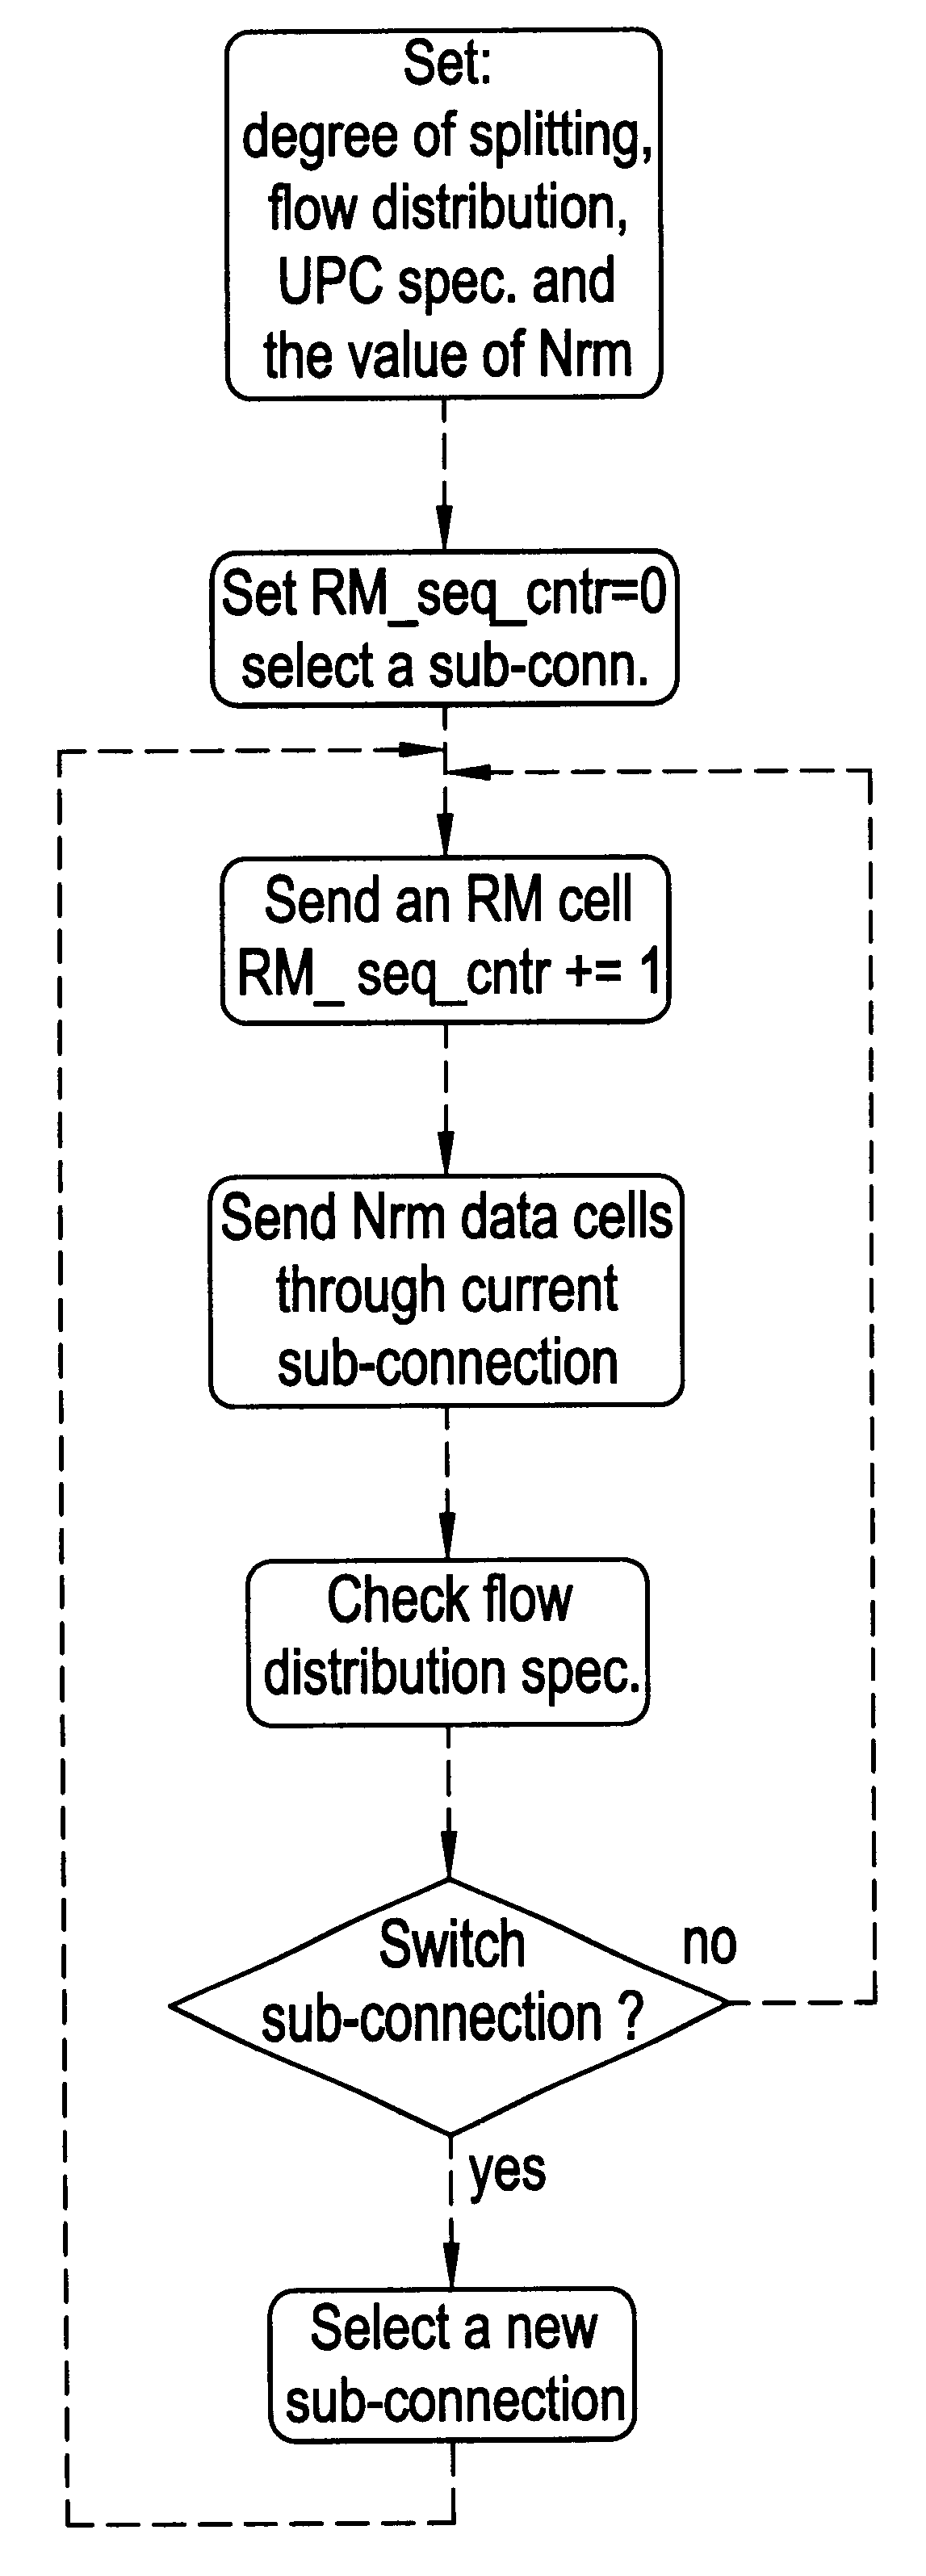 Connection splitting: an efficient way of reducing call blocking in ATM